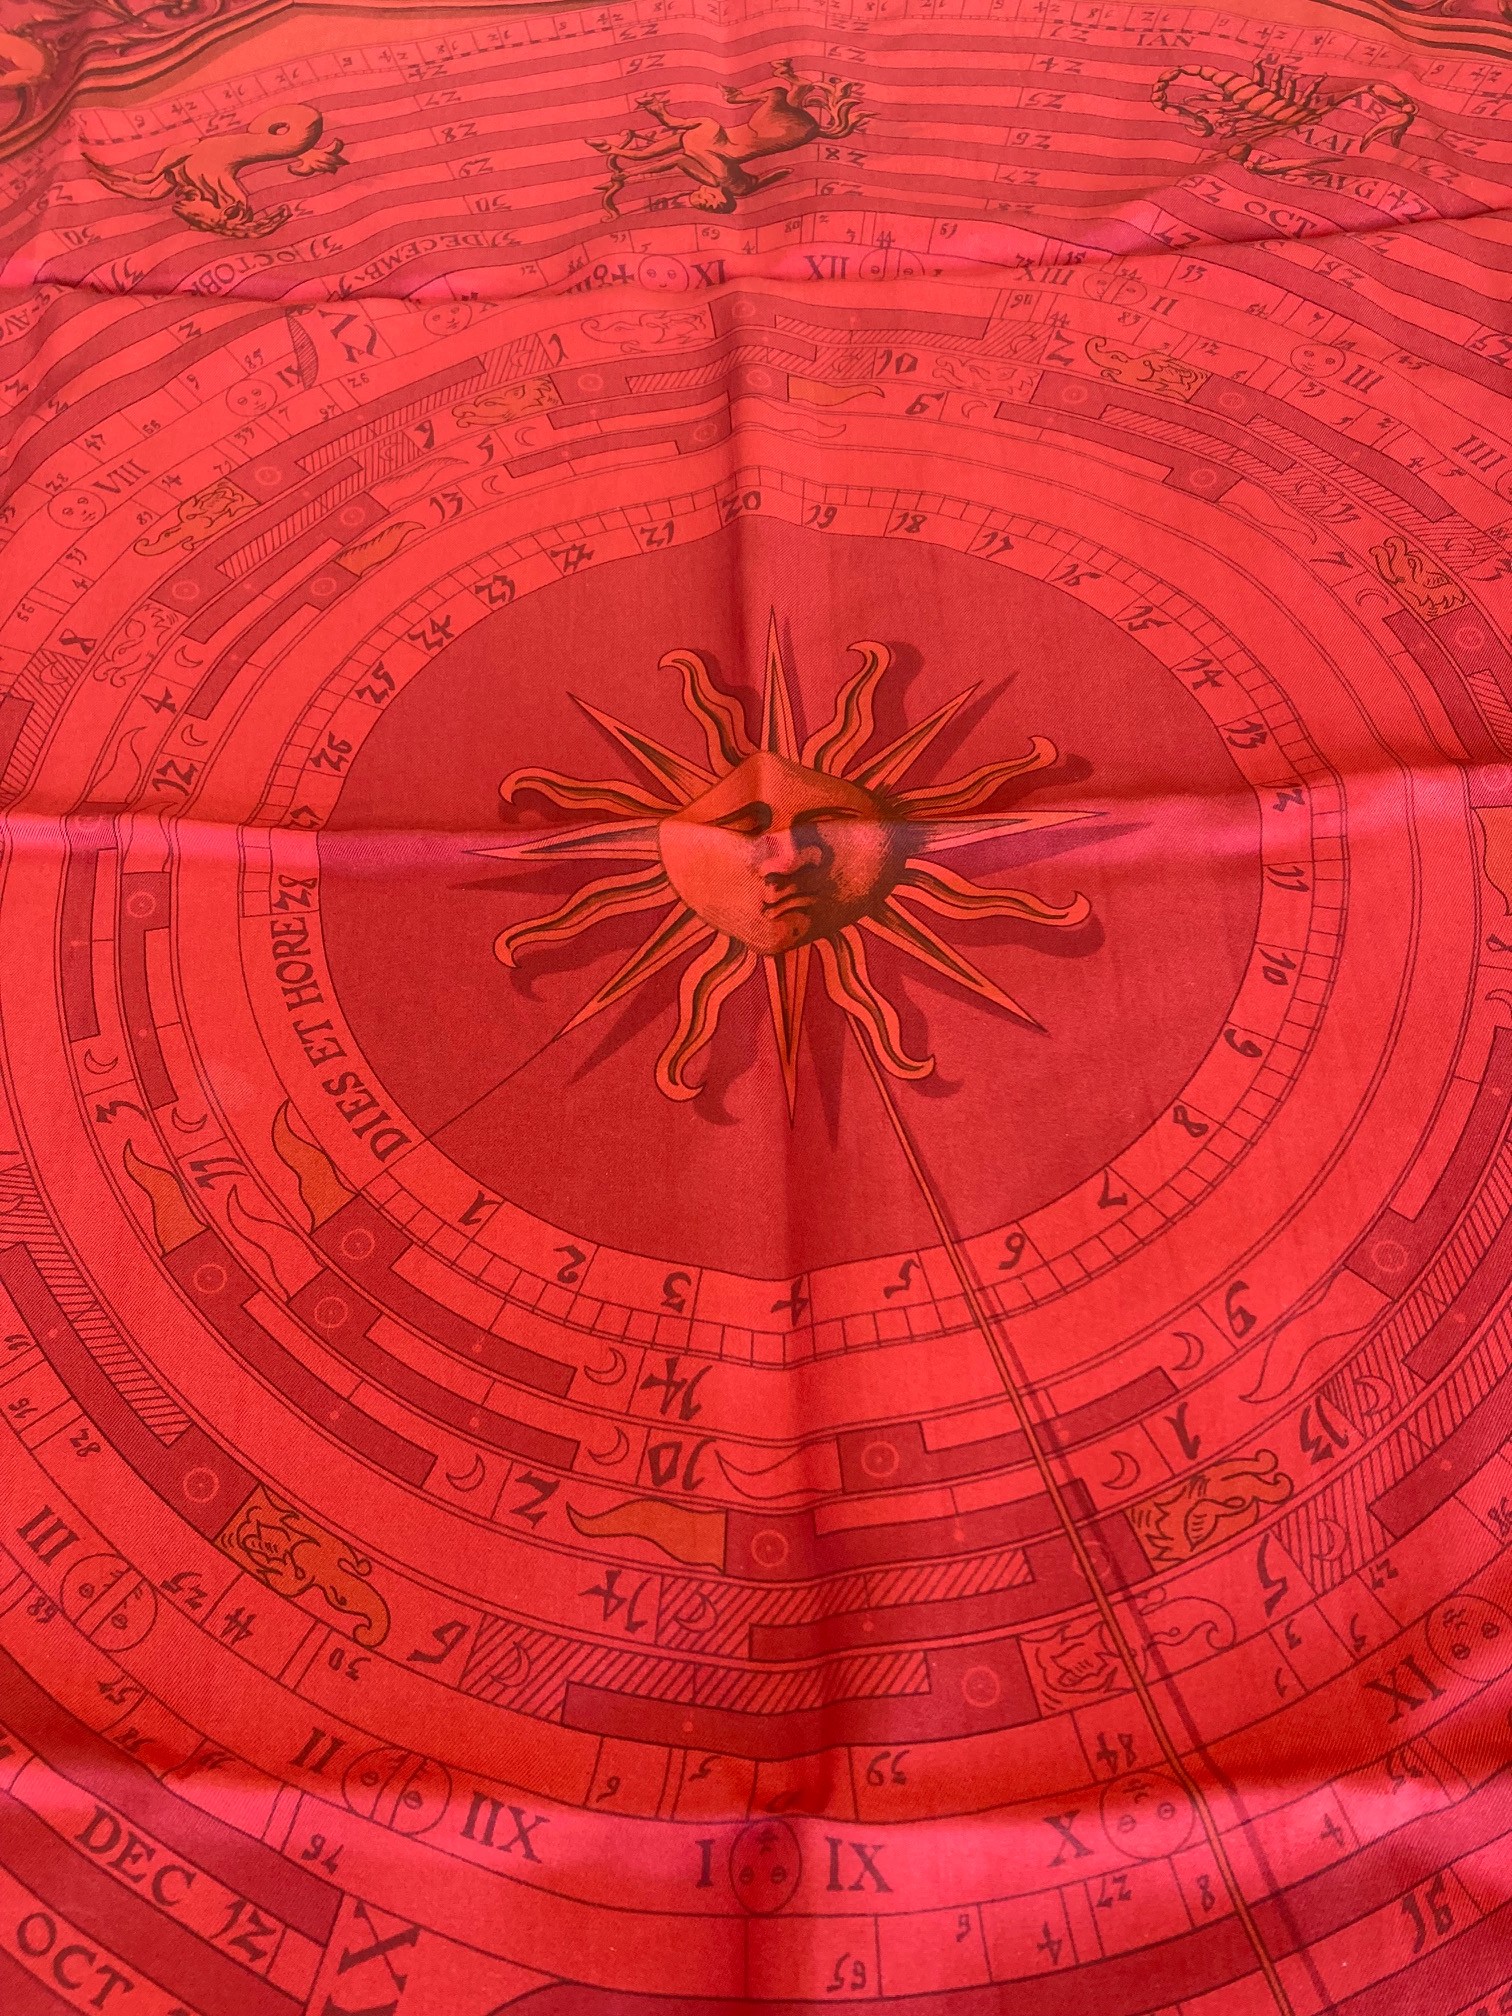 Hermes Scarf: Don't miss this great deal on this authentic Hermes scarf. It's in perfect condition with a  Zodiac pattern. Red.